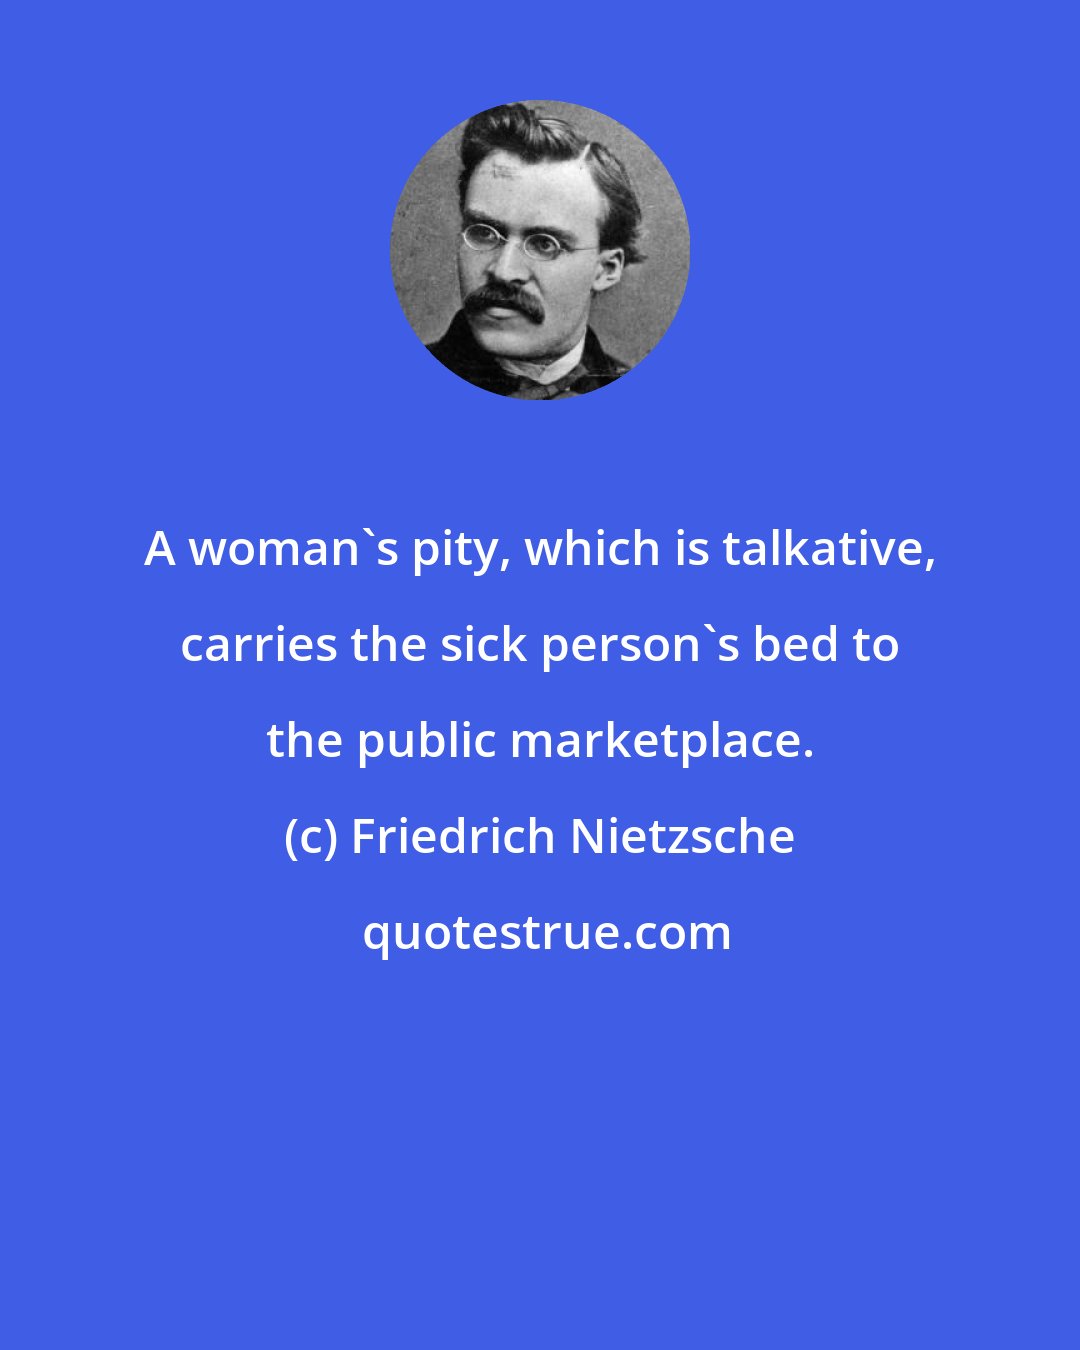 Friedrich Nietzsche: A woman's pity, which is talkative, carries the sick person's bed to the public marketplace.